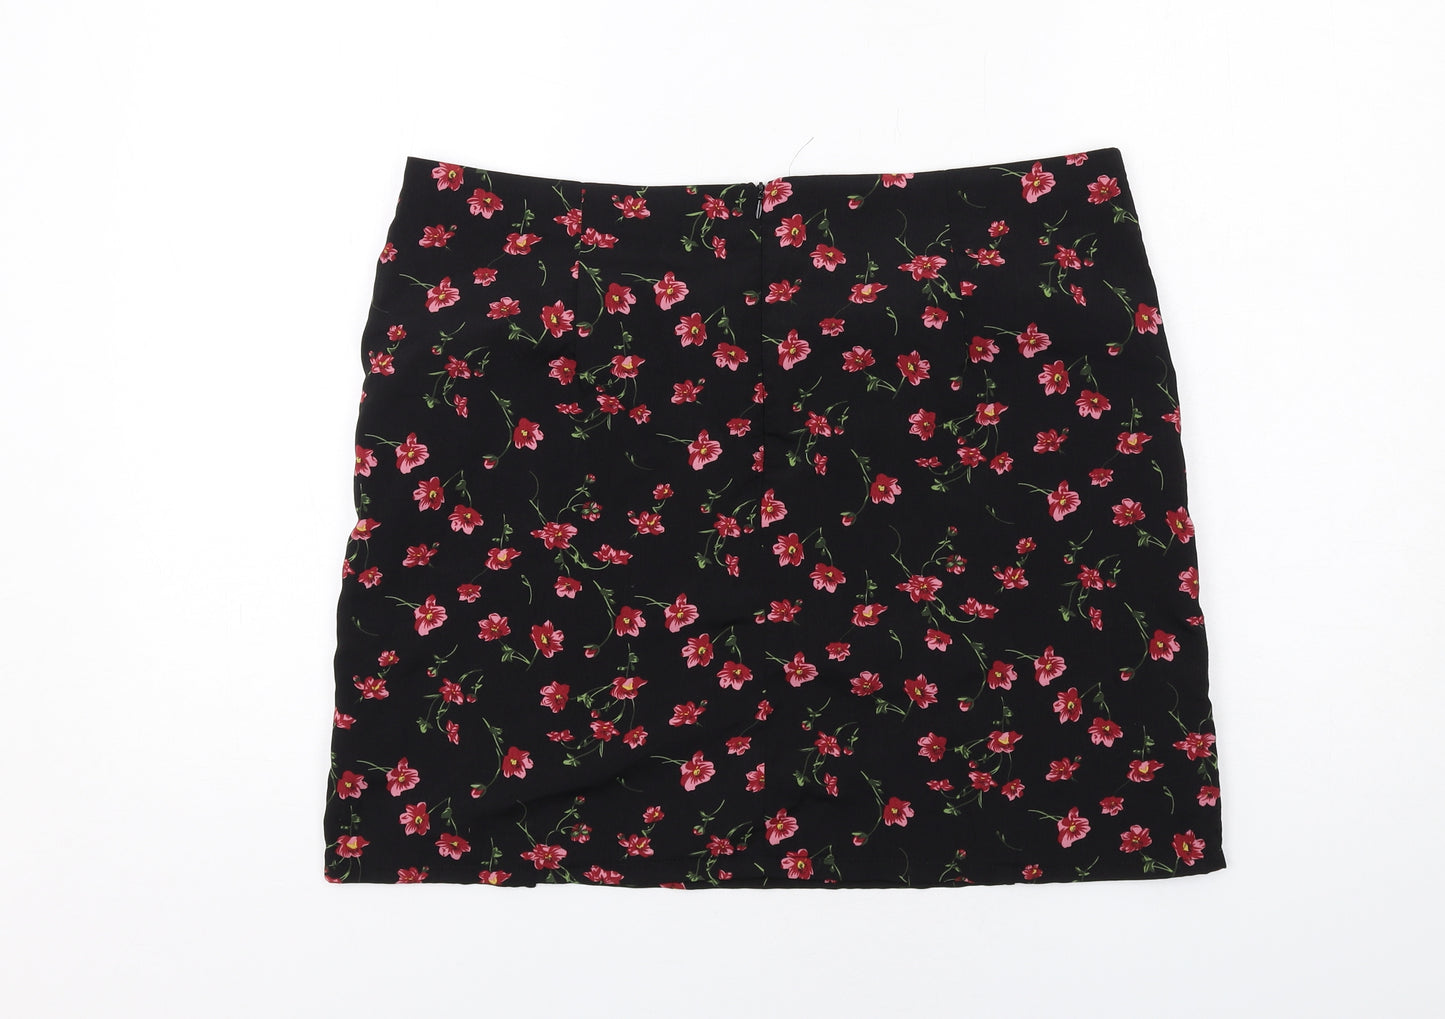 Daisy Street Womens Black Floral Polyester A-Line Skirt Size 16 Zip